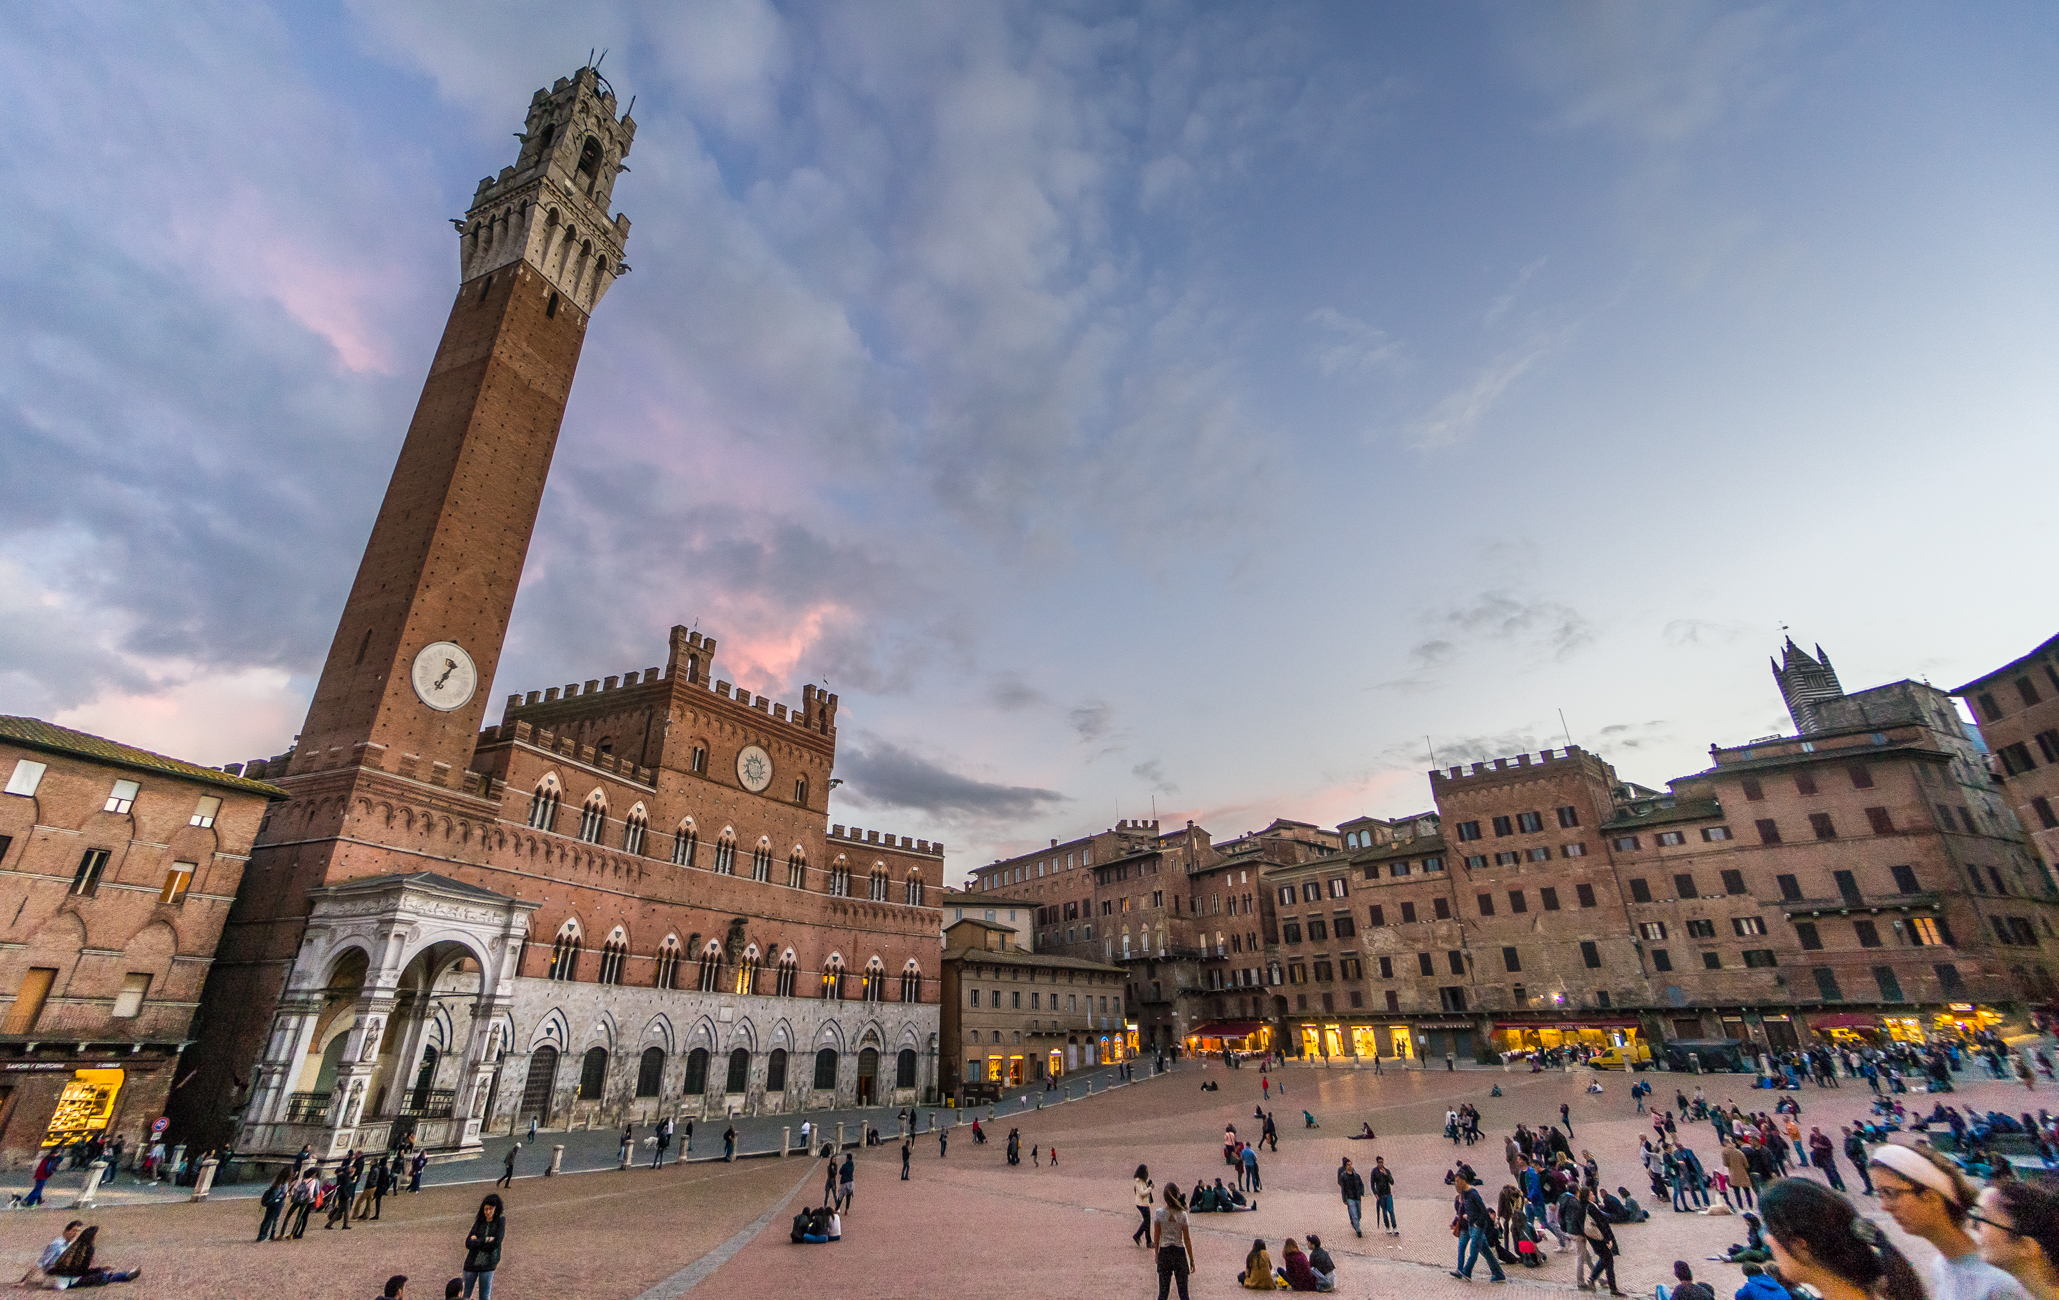 A surreal vision at twilight of Siena's Piazza del Campo (Italy) | Photo by Mike Hudak